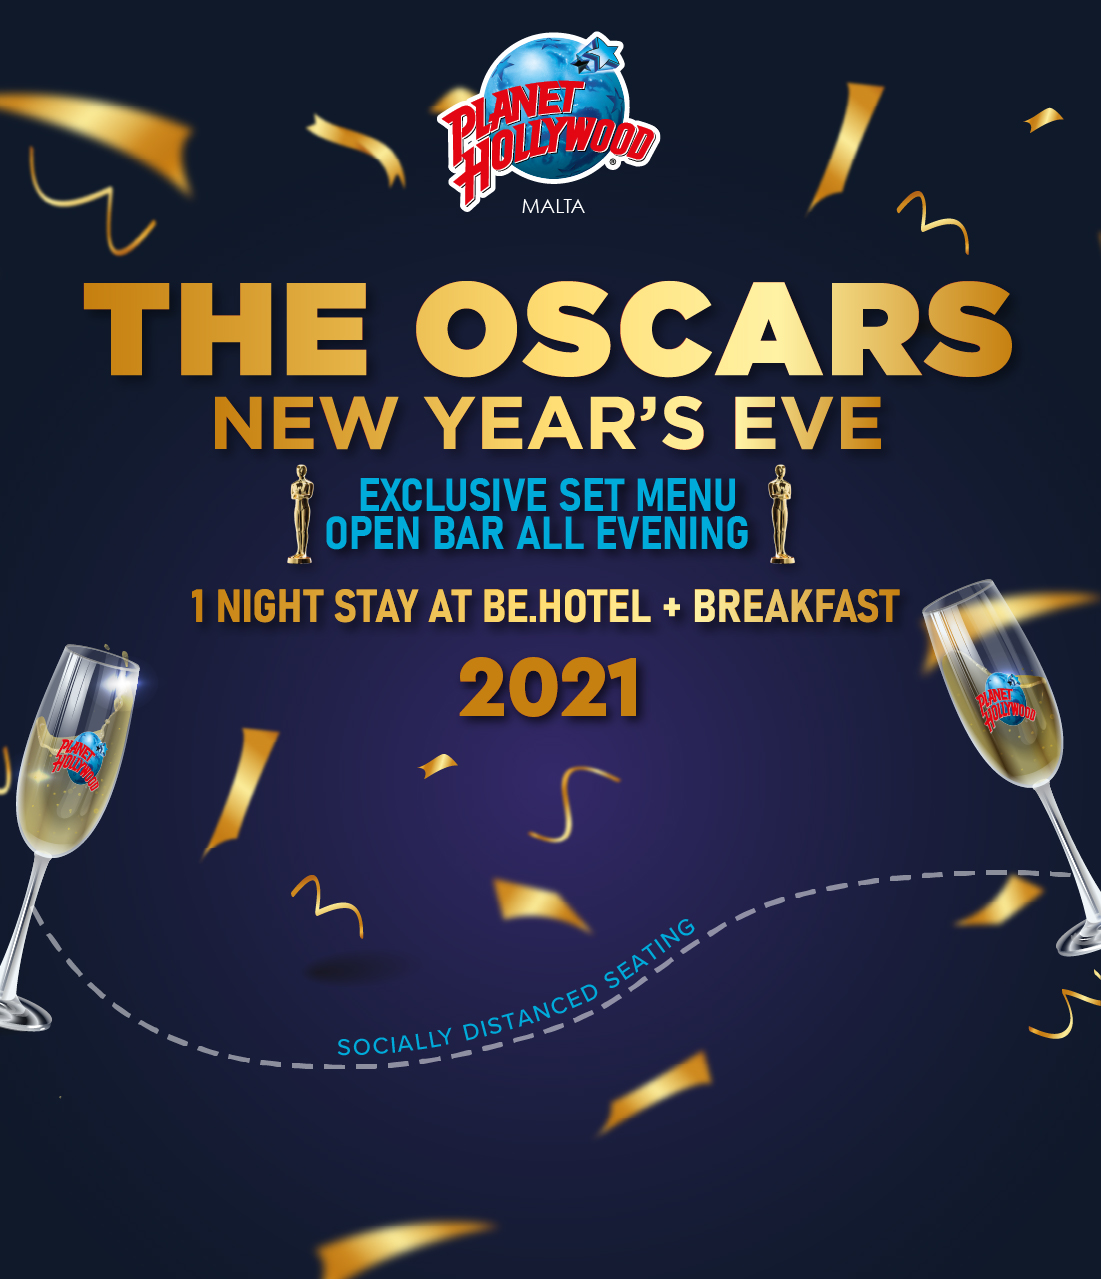 SOLD OUT:  The Oscars: NYE 2021 at Planet Hollywood Malta poster